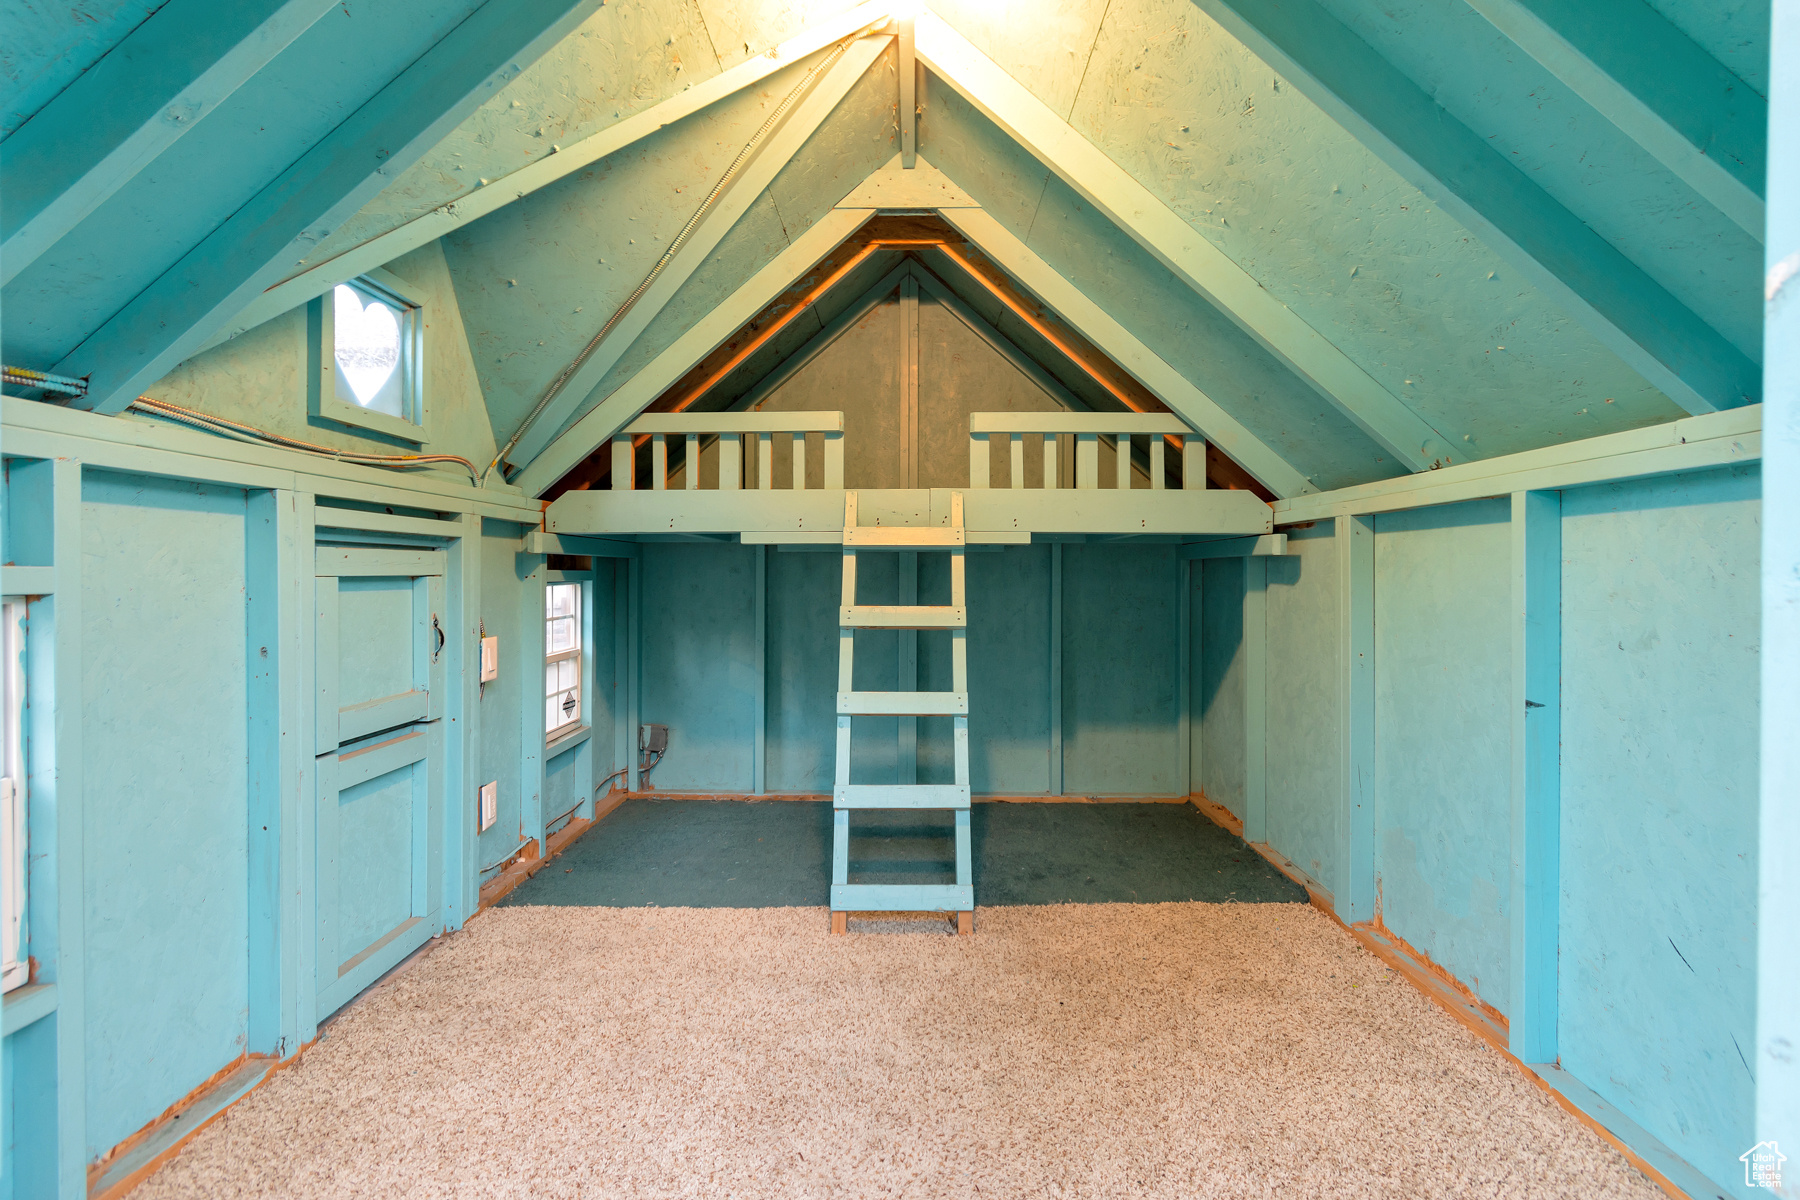 Playhouse in the backyard with built-in bunk beds